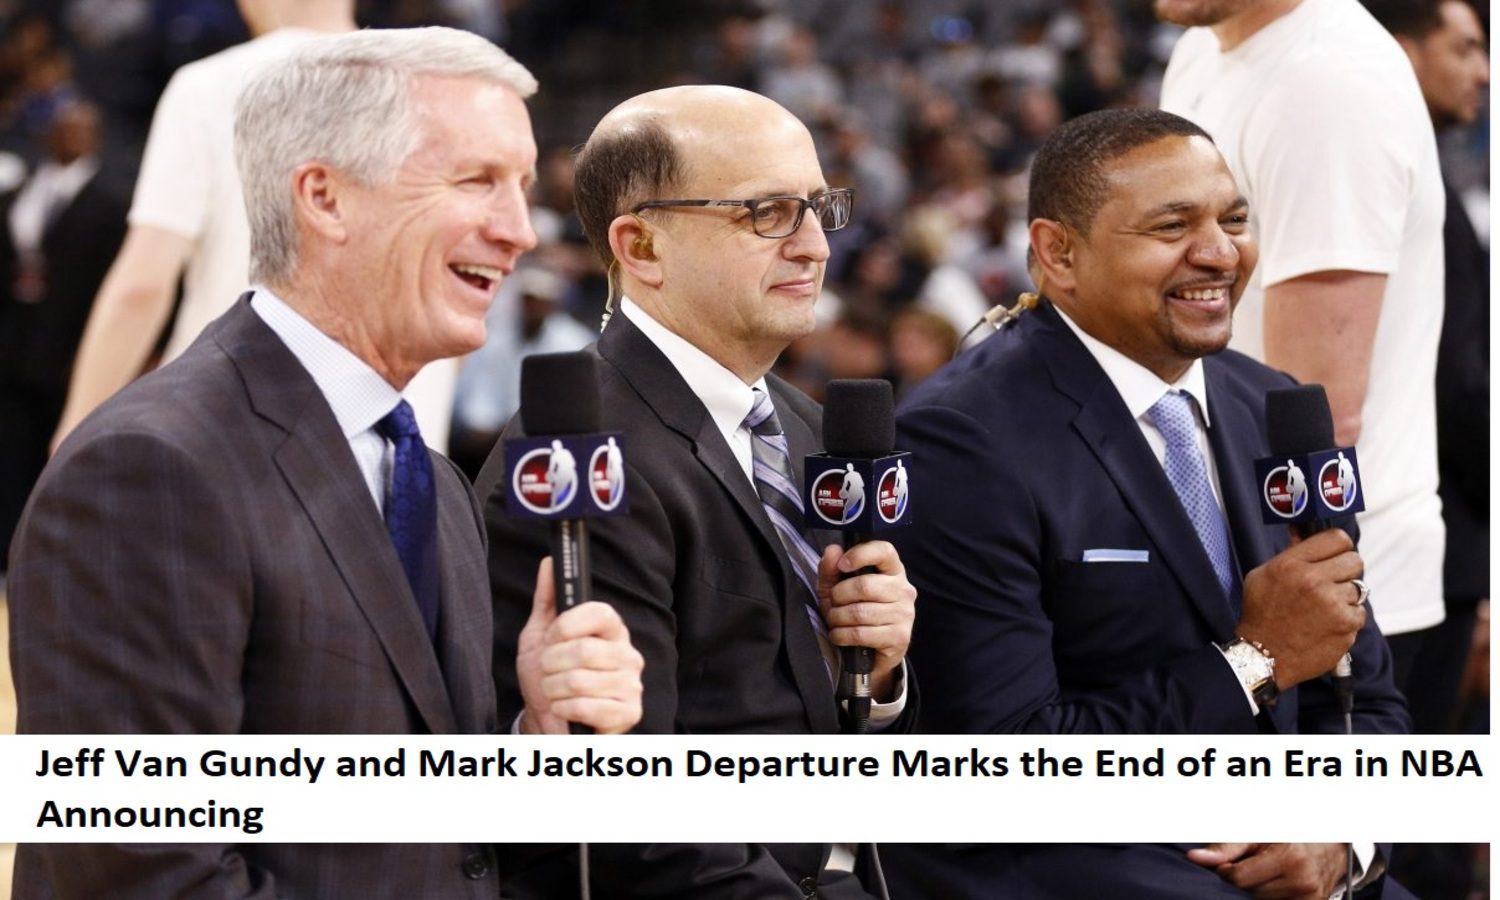 Jeff Van Gundy and Mark Jackson Departure Marks the End of an Era in NBA Announcing